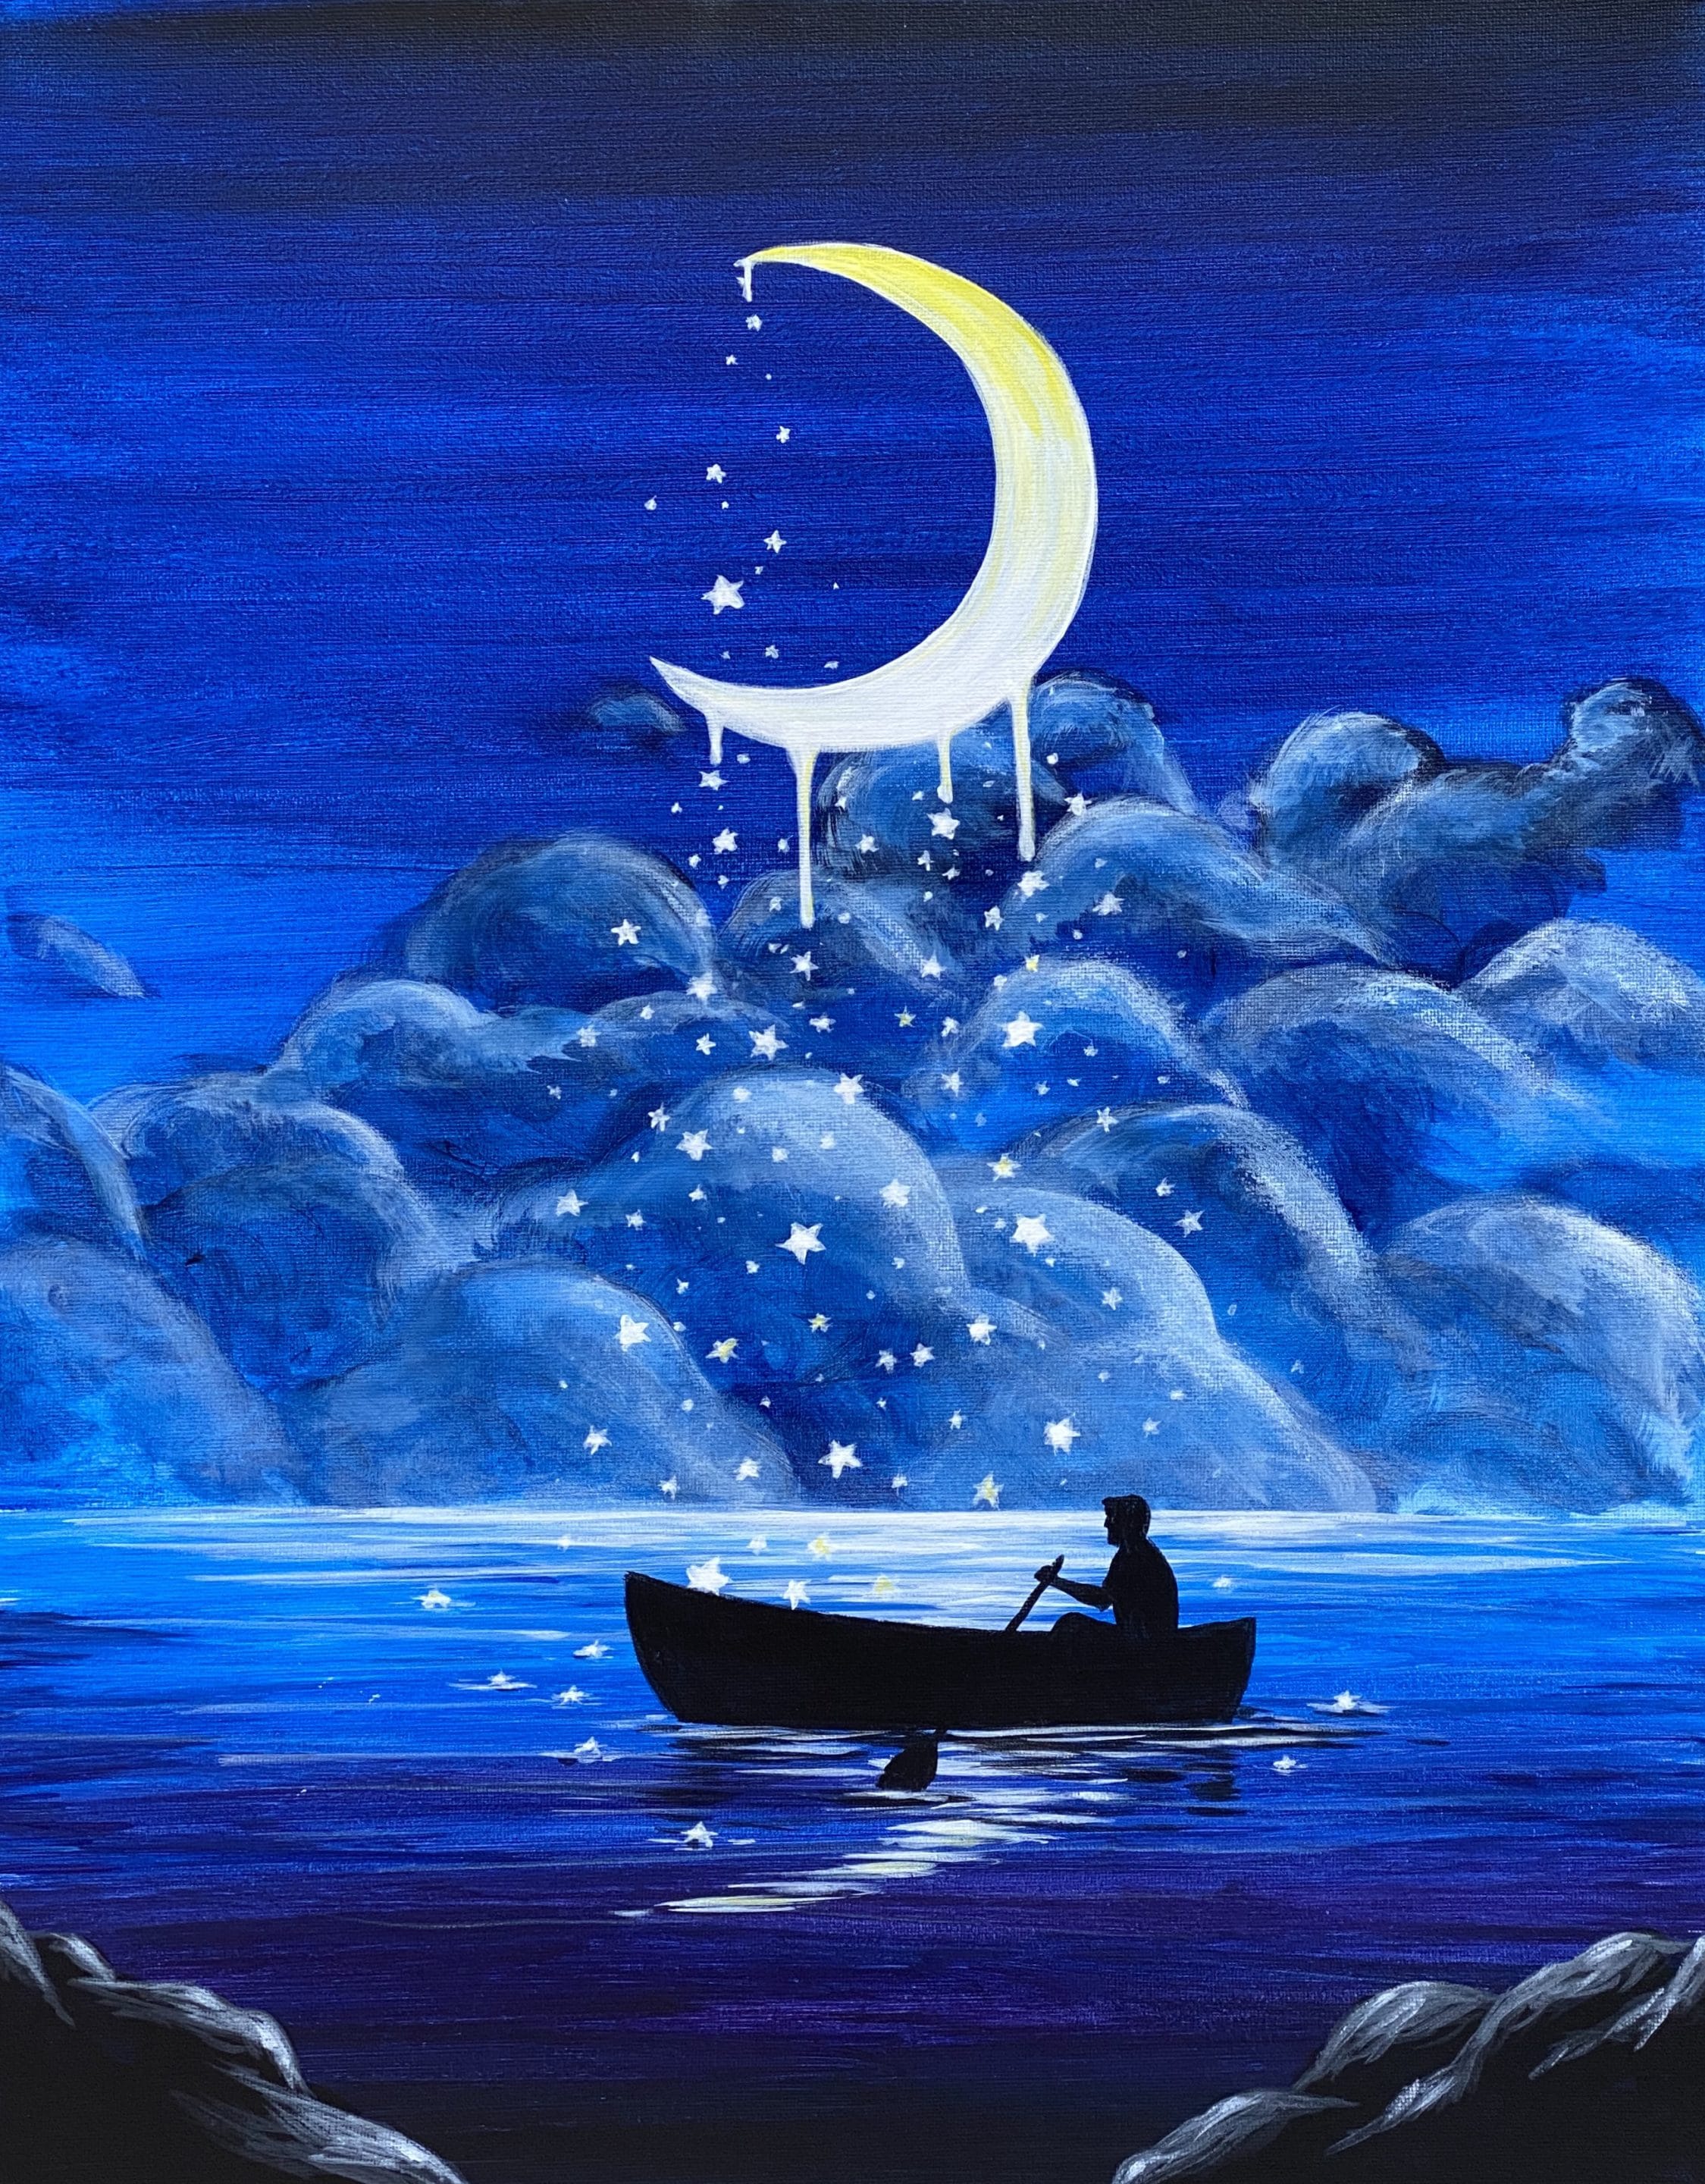 Crescent moon with starts that twinkle and fall to a lake below as a person in a canoe tries to catch them.